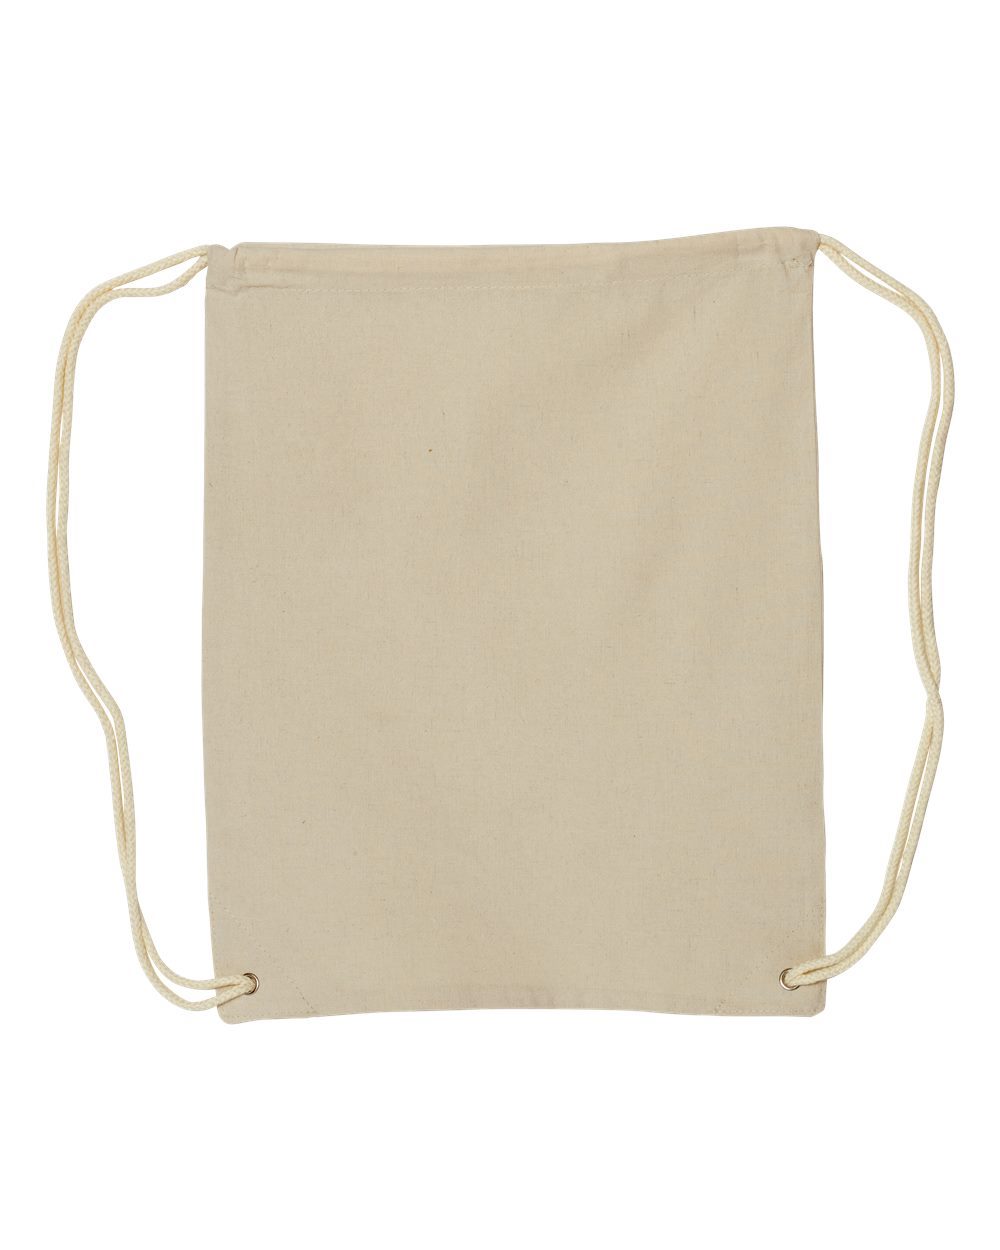 Liberty Bags Canvas Drawstring Backpack - image 2 of 3